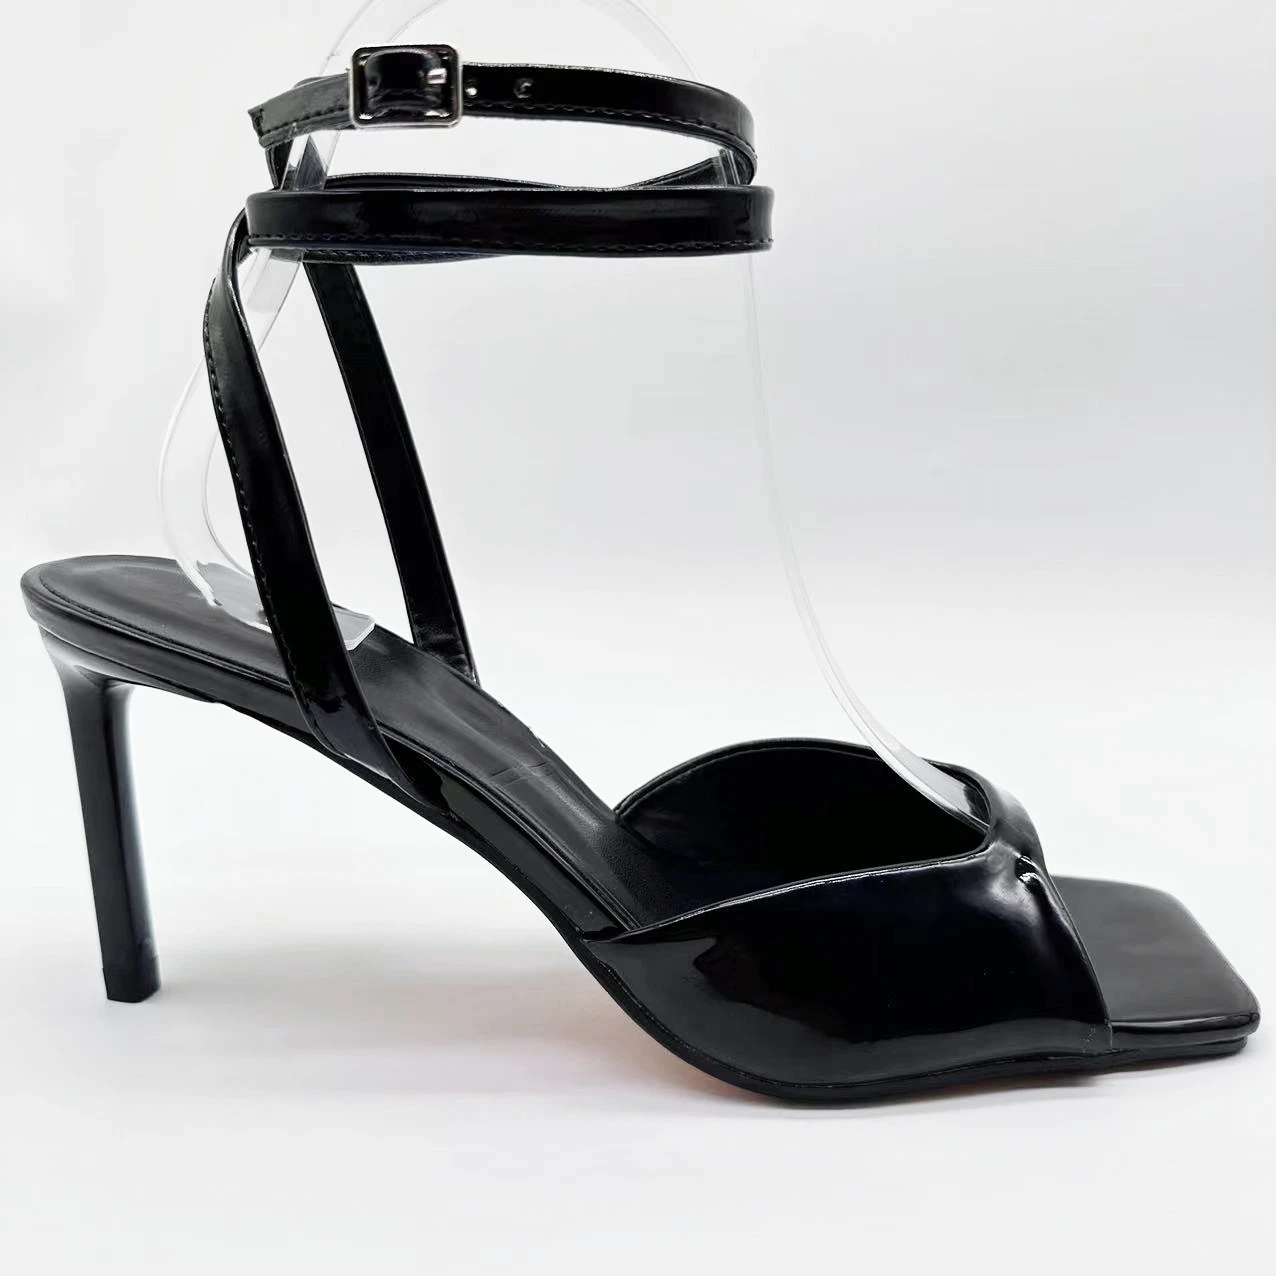 

The New 2024 Women's Shoes Are Fashionable and Thin-heeled, With Hollow Square Toe Anklet Straps and Patent Leather Shoes.